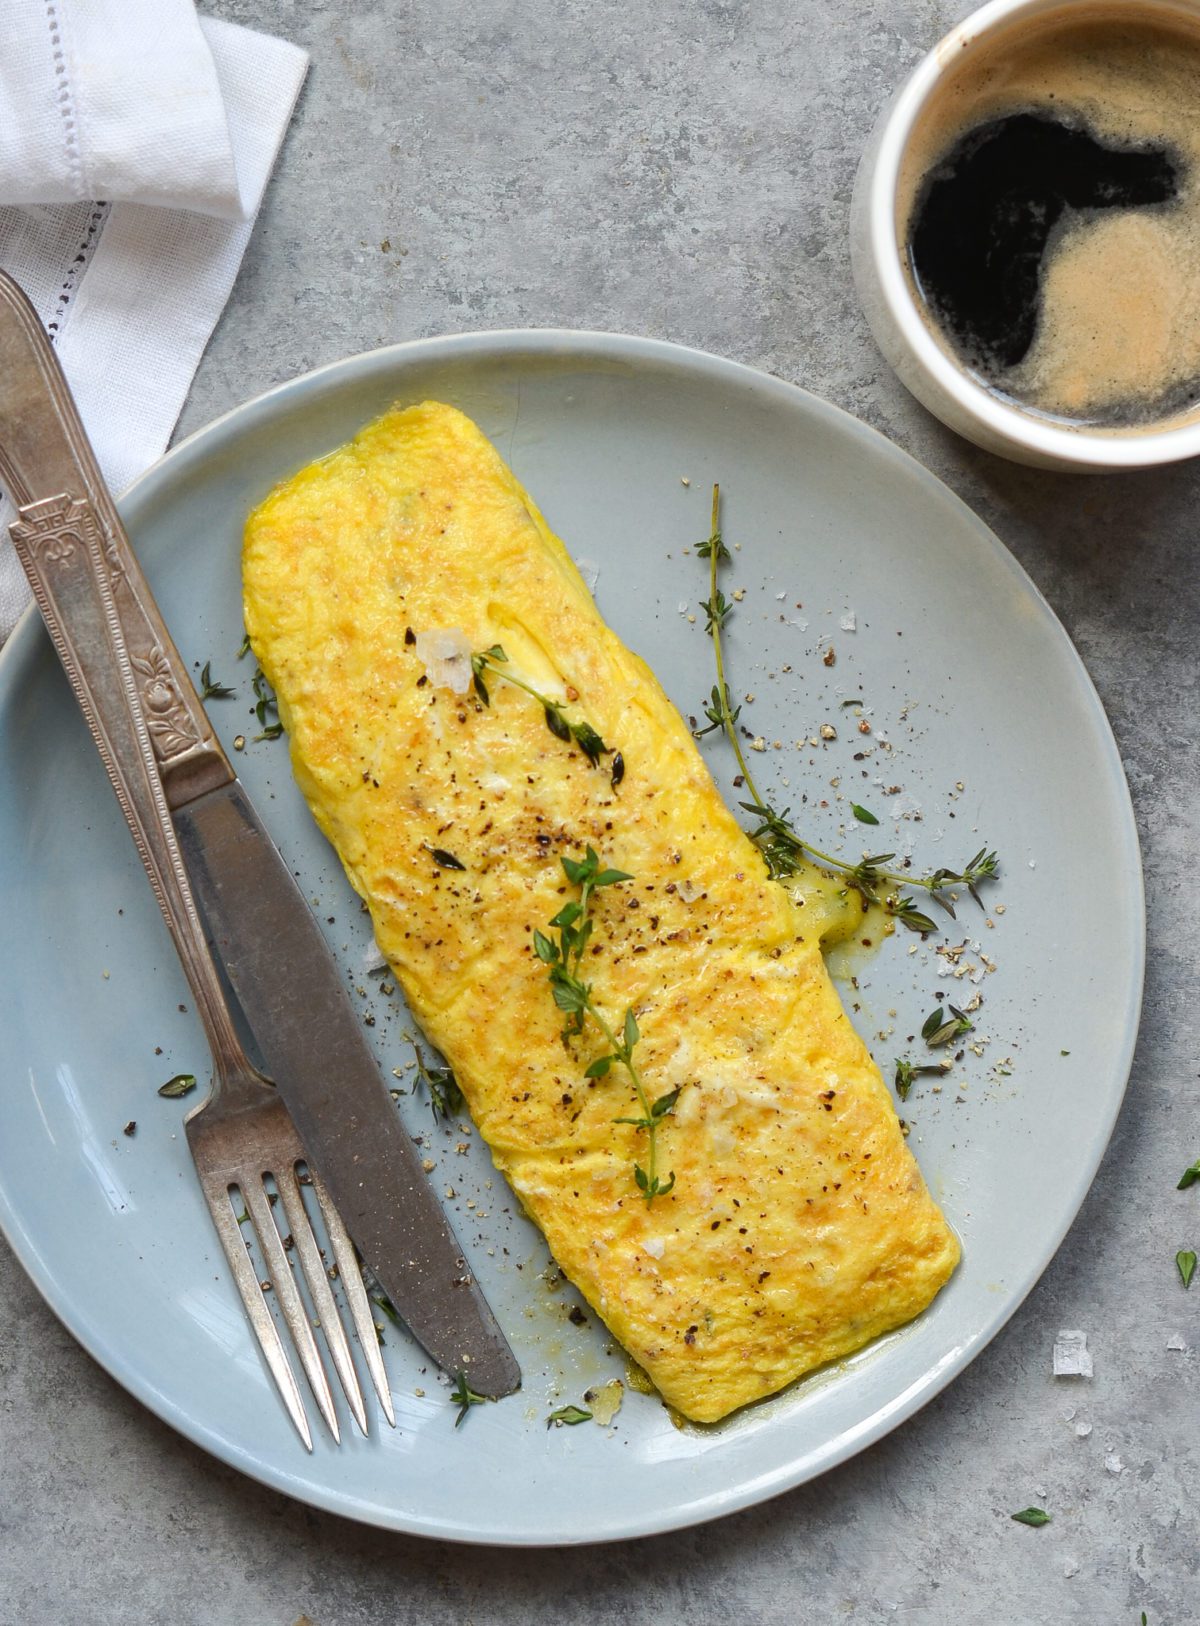 How To Make An Omelette at Home With The Omelette Maker